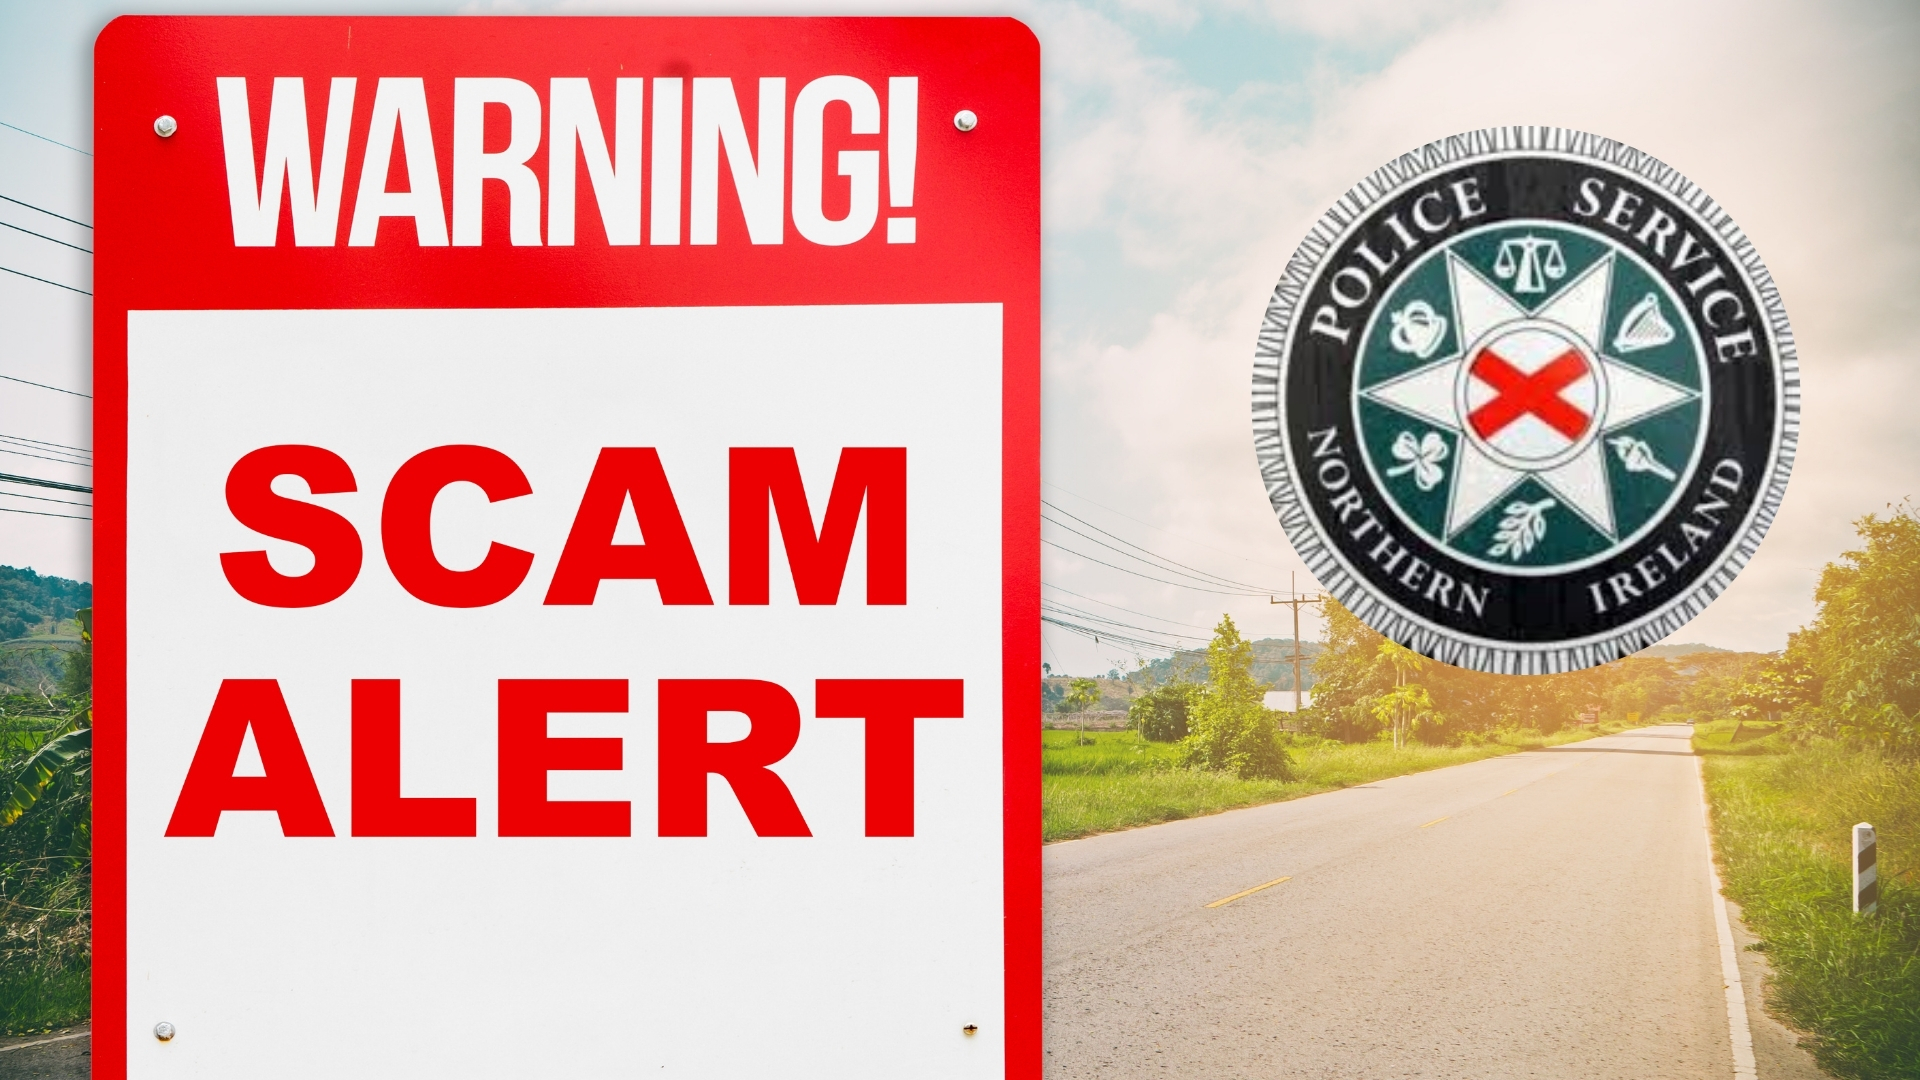 Police issue scam warning after spate of recent scams - Newry police - Co Down news online